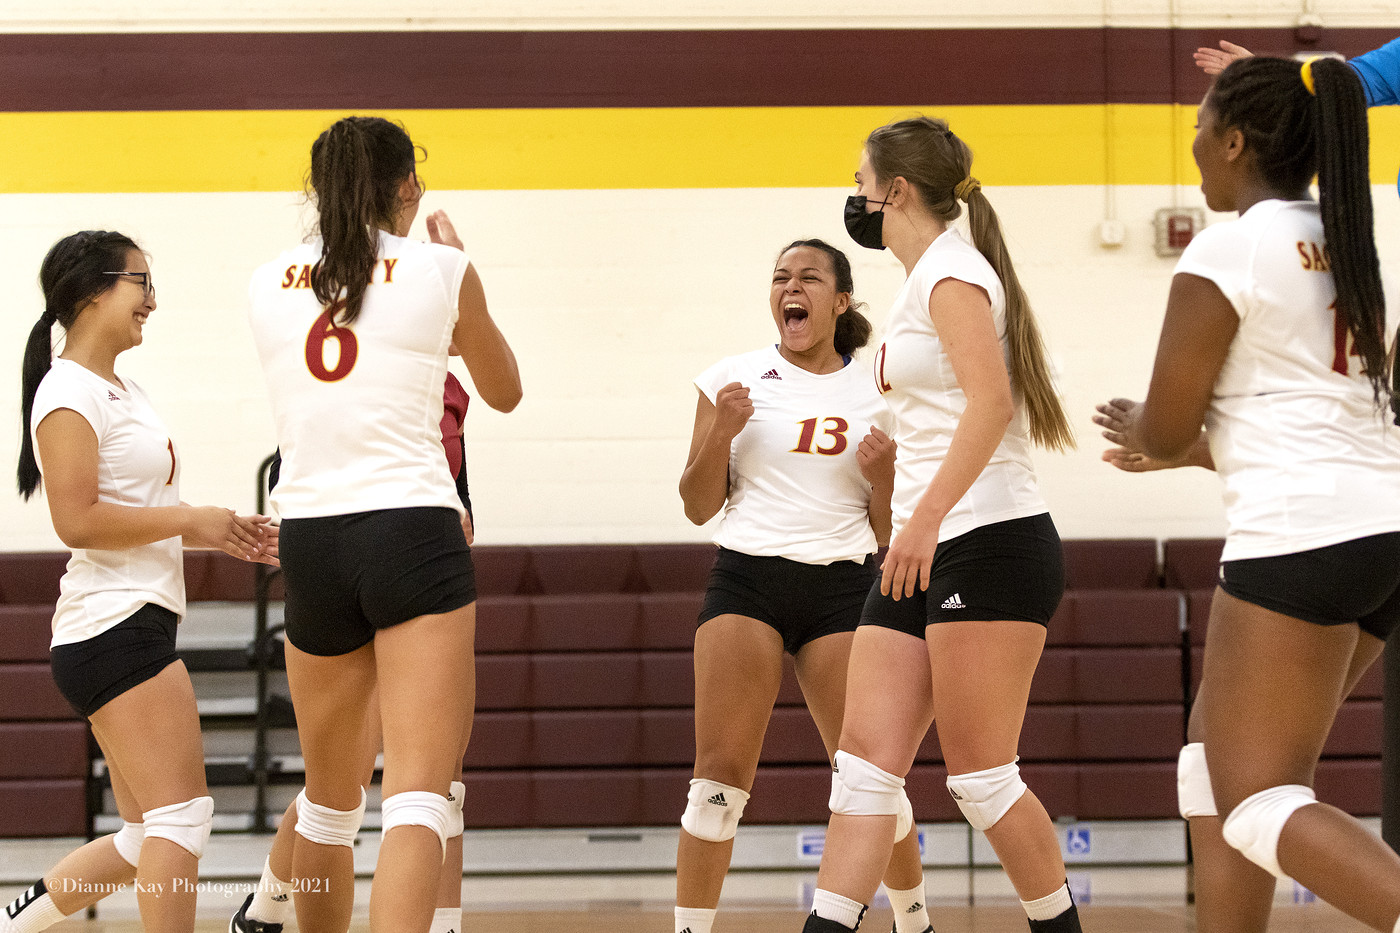 Down 2-0, the Panthers rally back to beat Porterville 3-2 (22-25, 17-25, 25-23, 25-20, 15-9) for their 1st win of the season